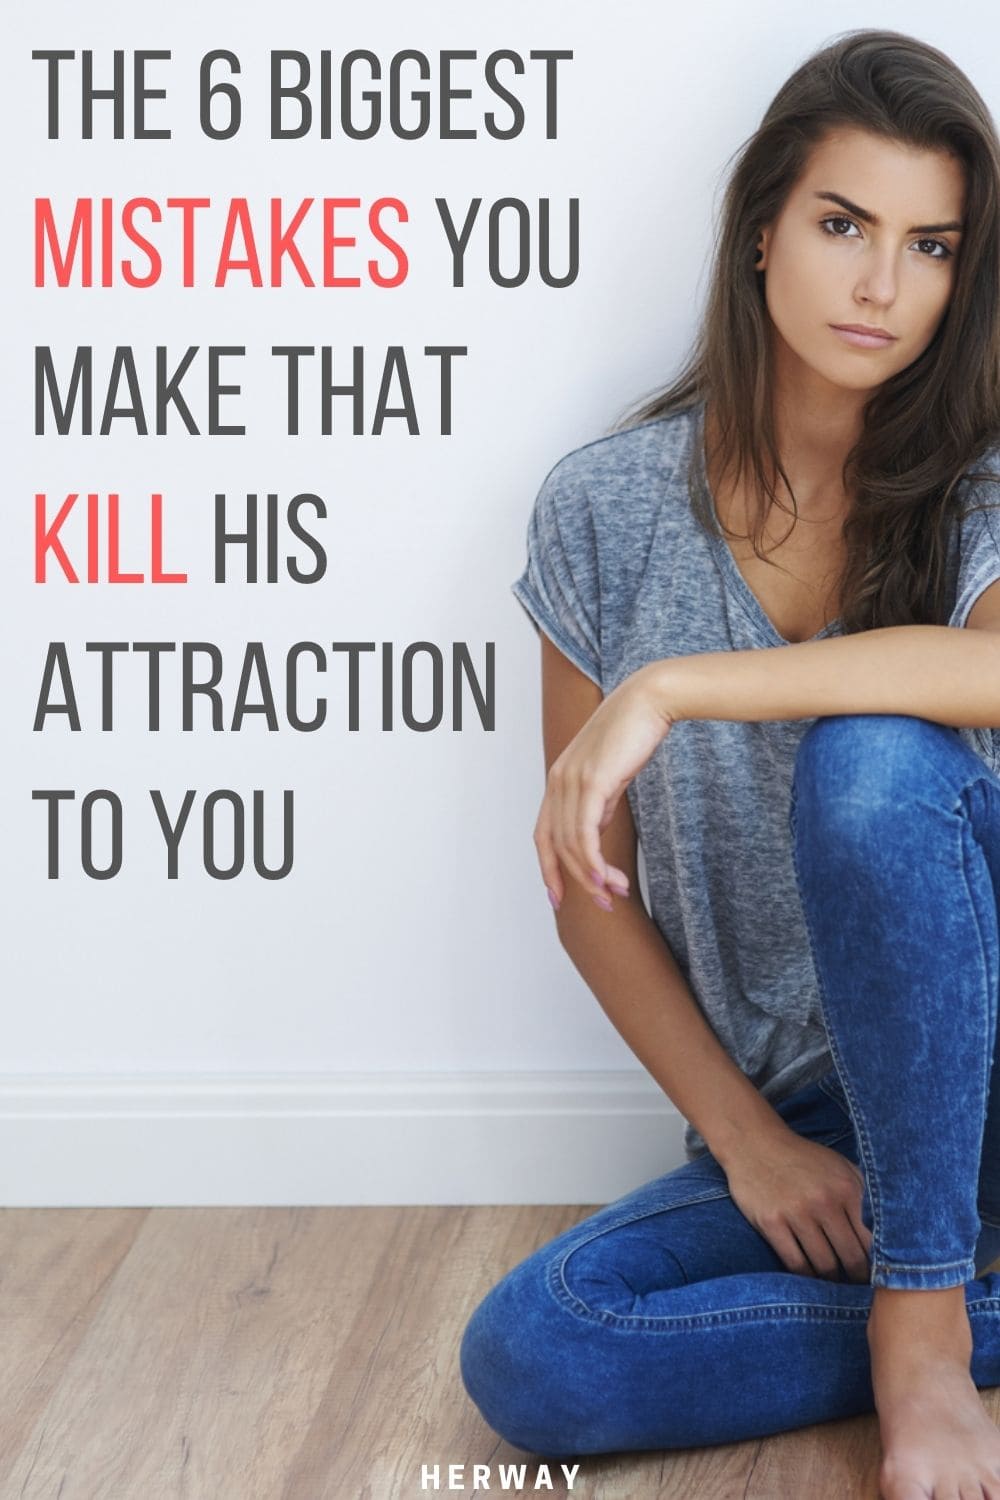 The 6 Biggest Mistakes You Make That Kill His Attraction To You